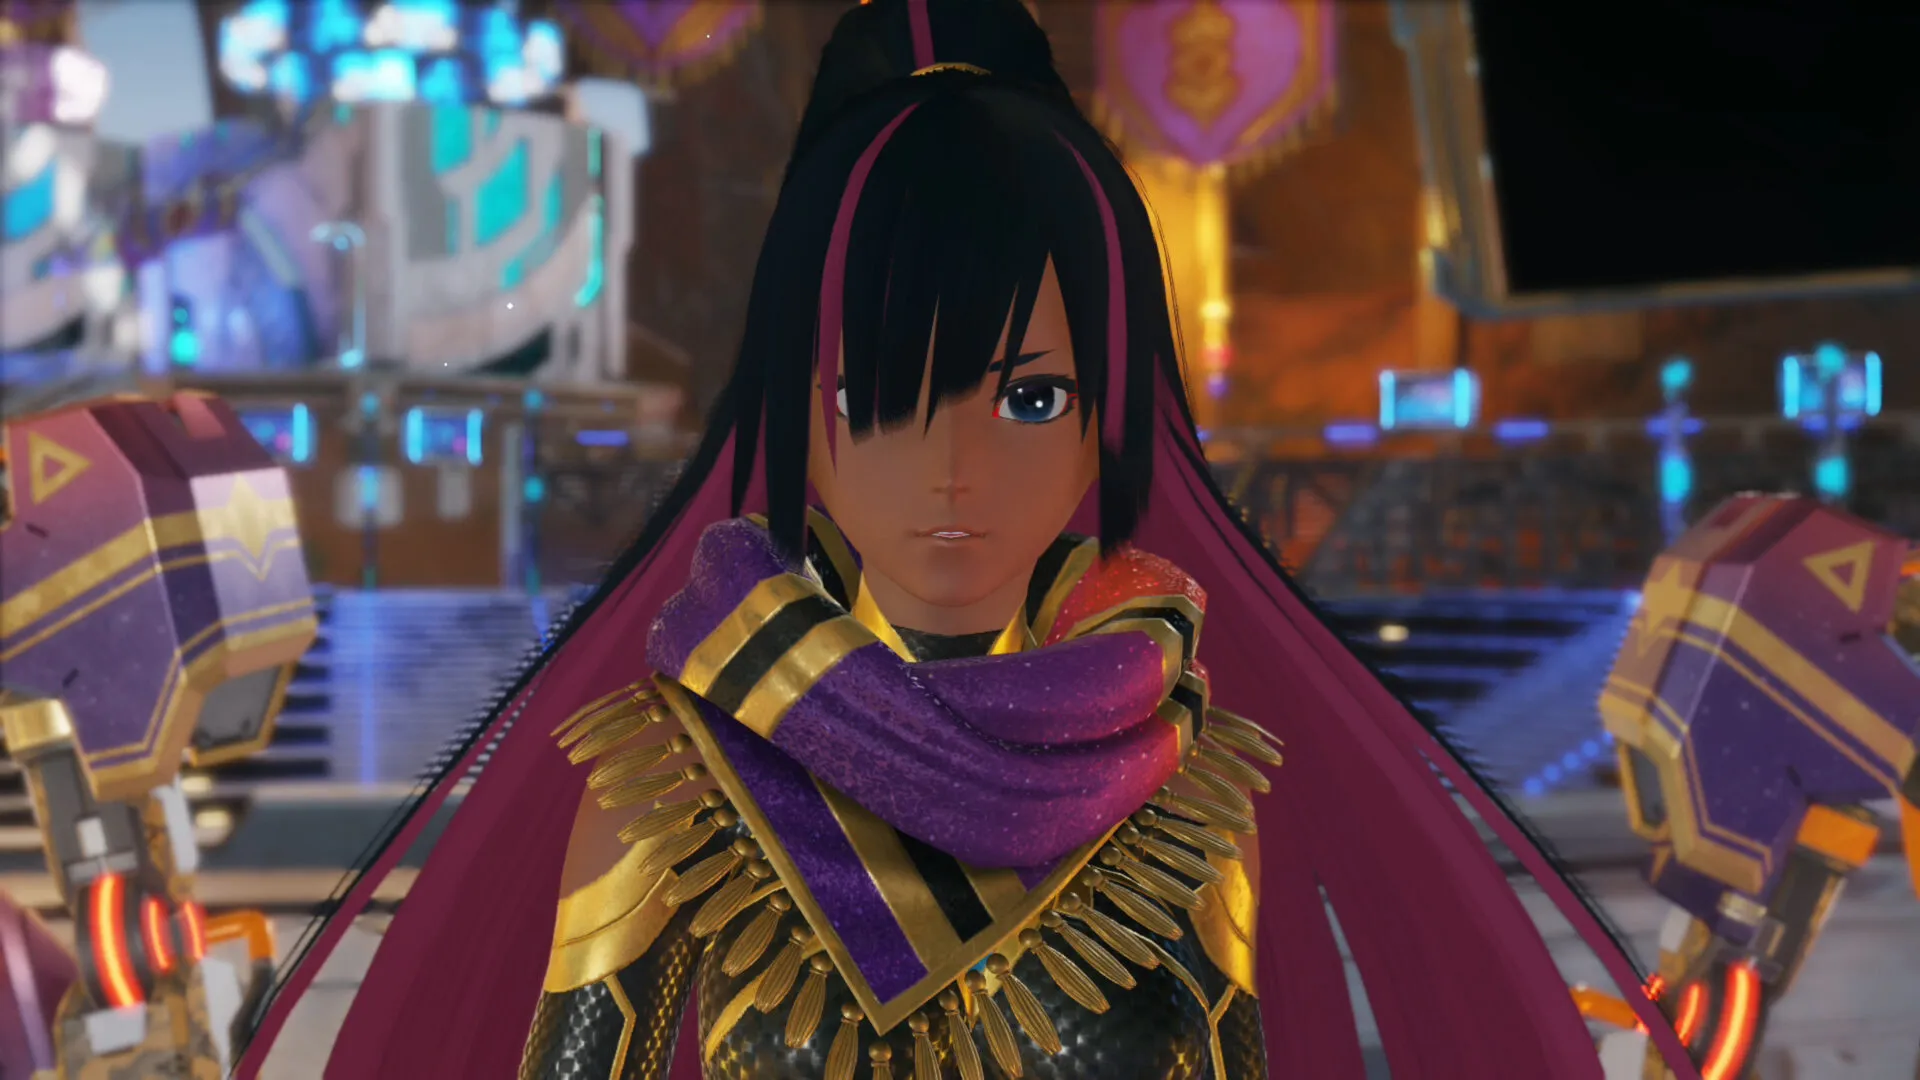 Phantasy Star Online 2 New Genesis Reveals New Major Update Characters Attack On Titan Collab 